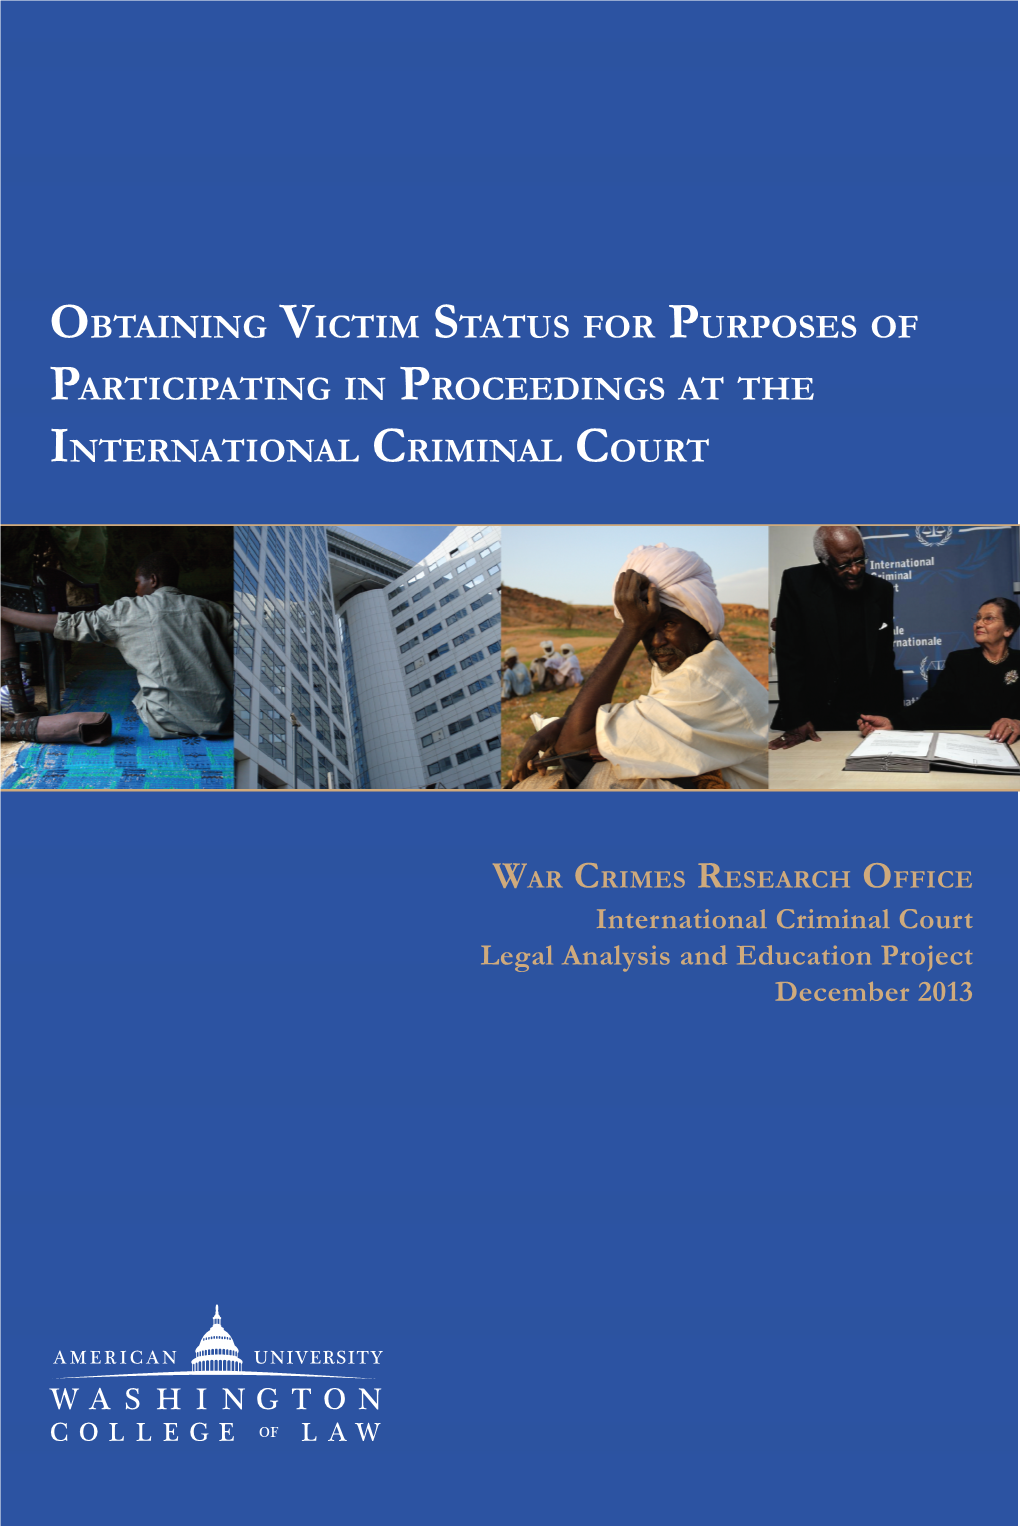 Obtaining Victim Status for Purposes of Participating in Proceedings at the International Criminal Court